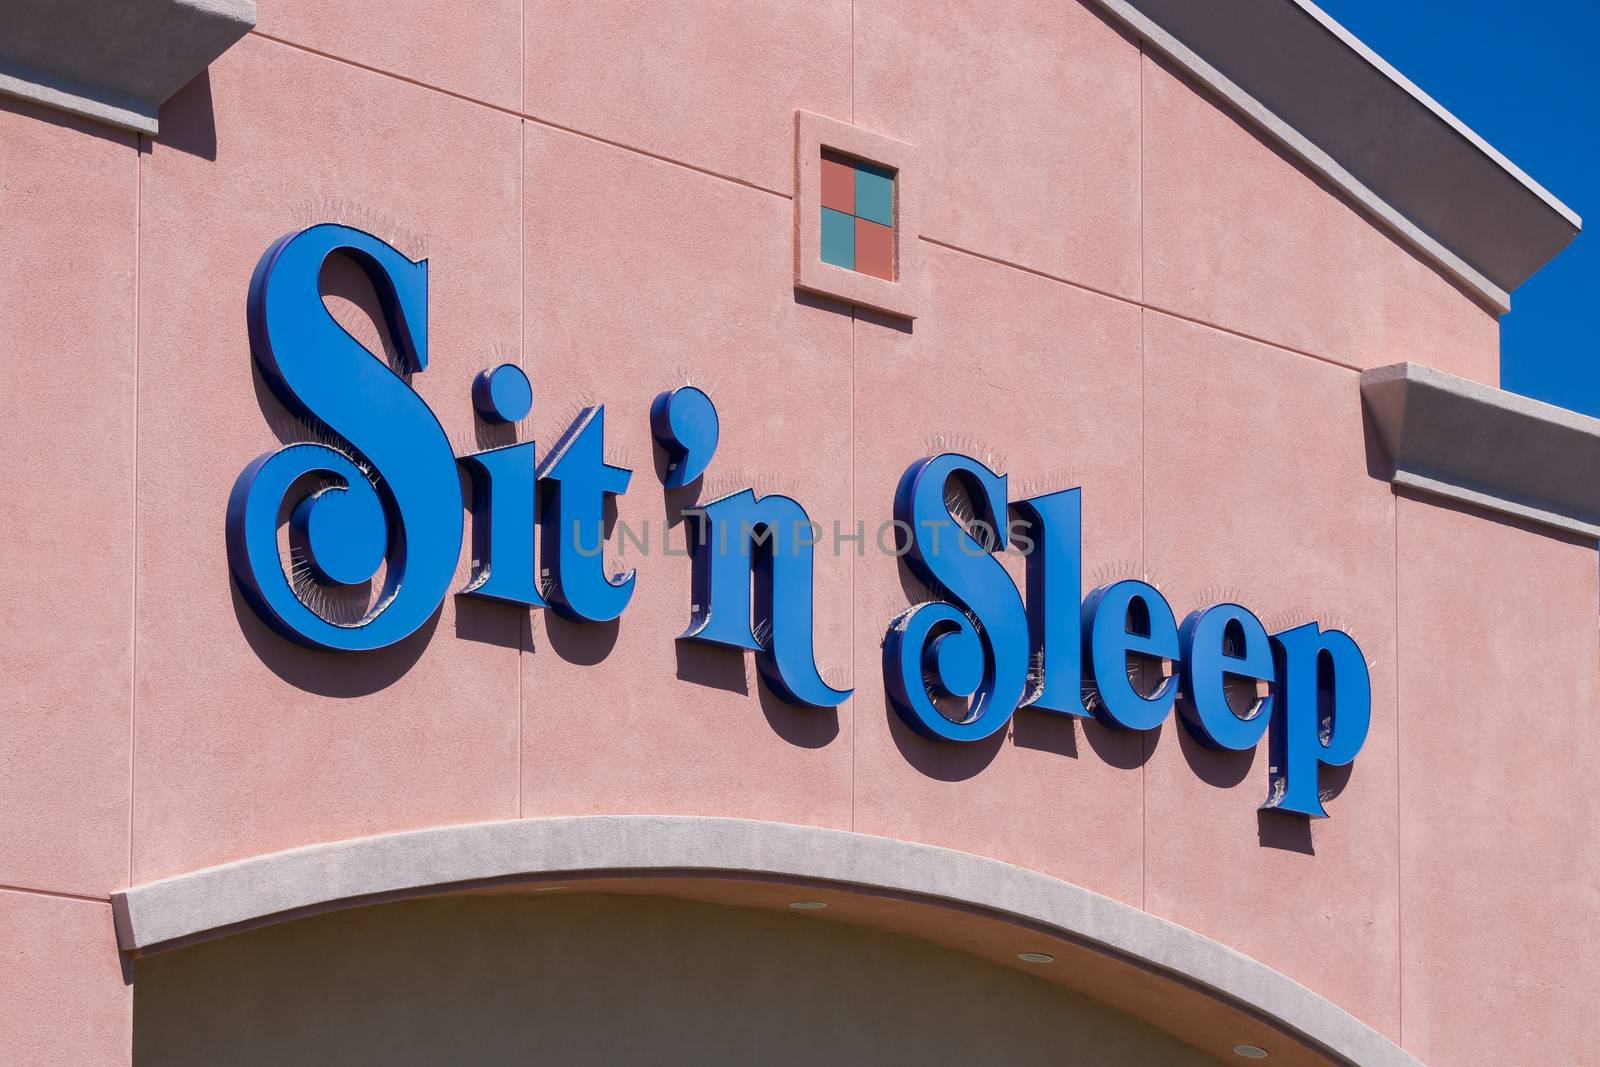 Sit 'n Sleep Retail Store and Sign by wolterk